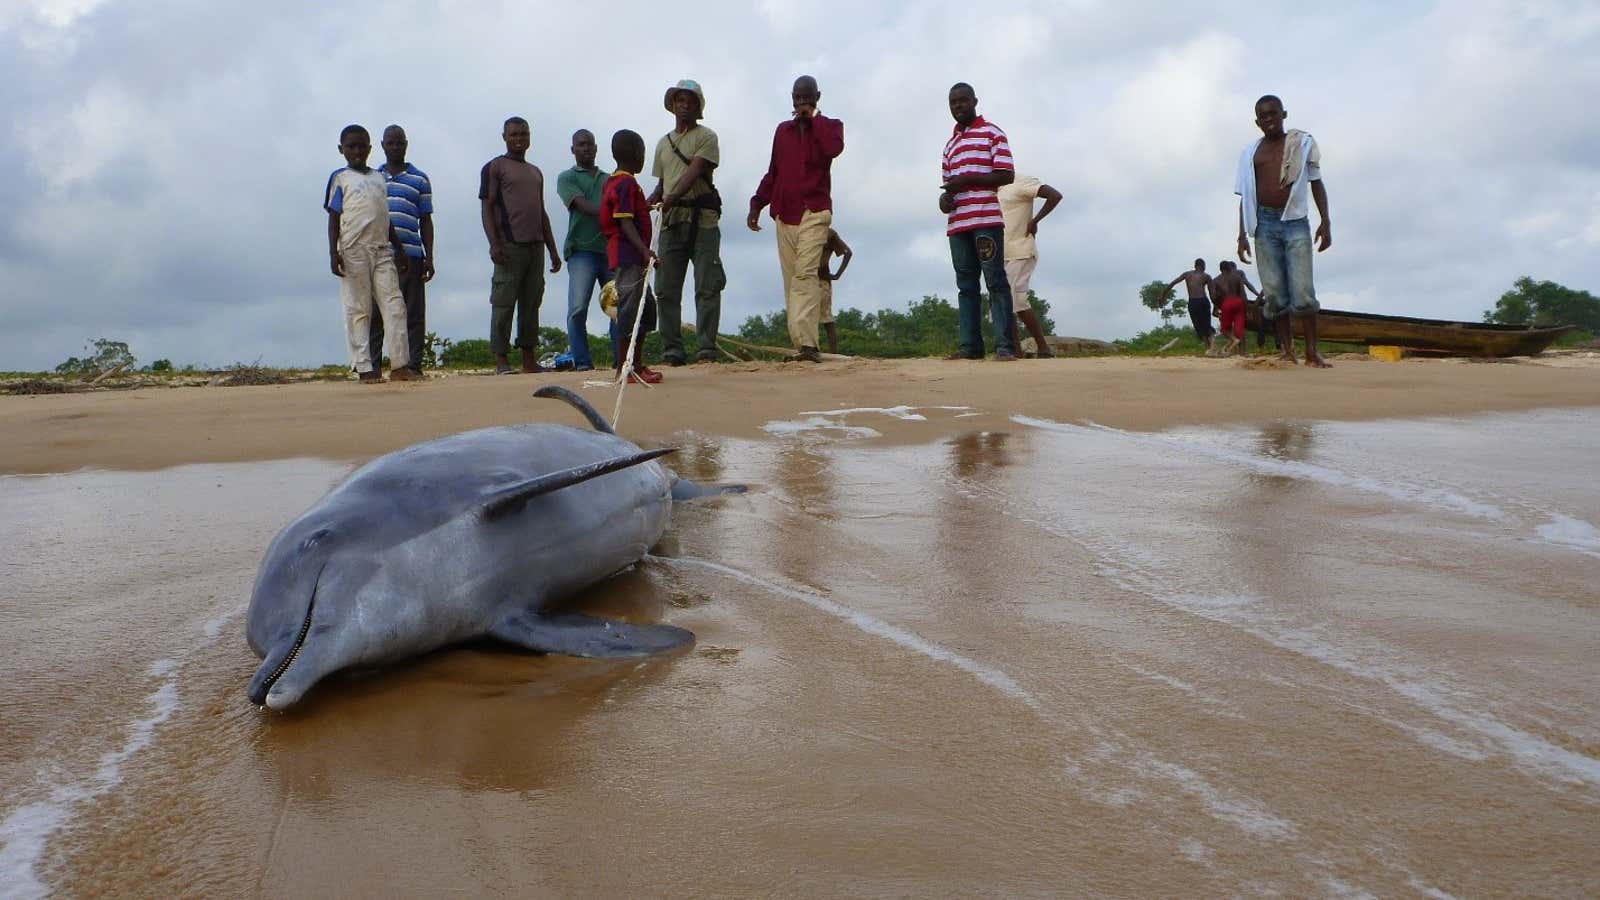 Entanglement in fishing gear is one of the many threats faced by the Atlantic humpback dolphin along its coastal range in western Africa